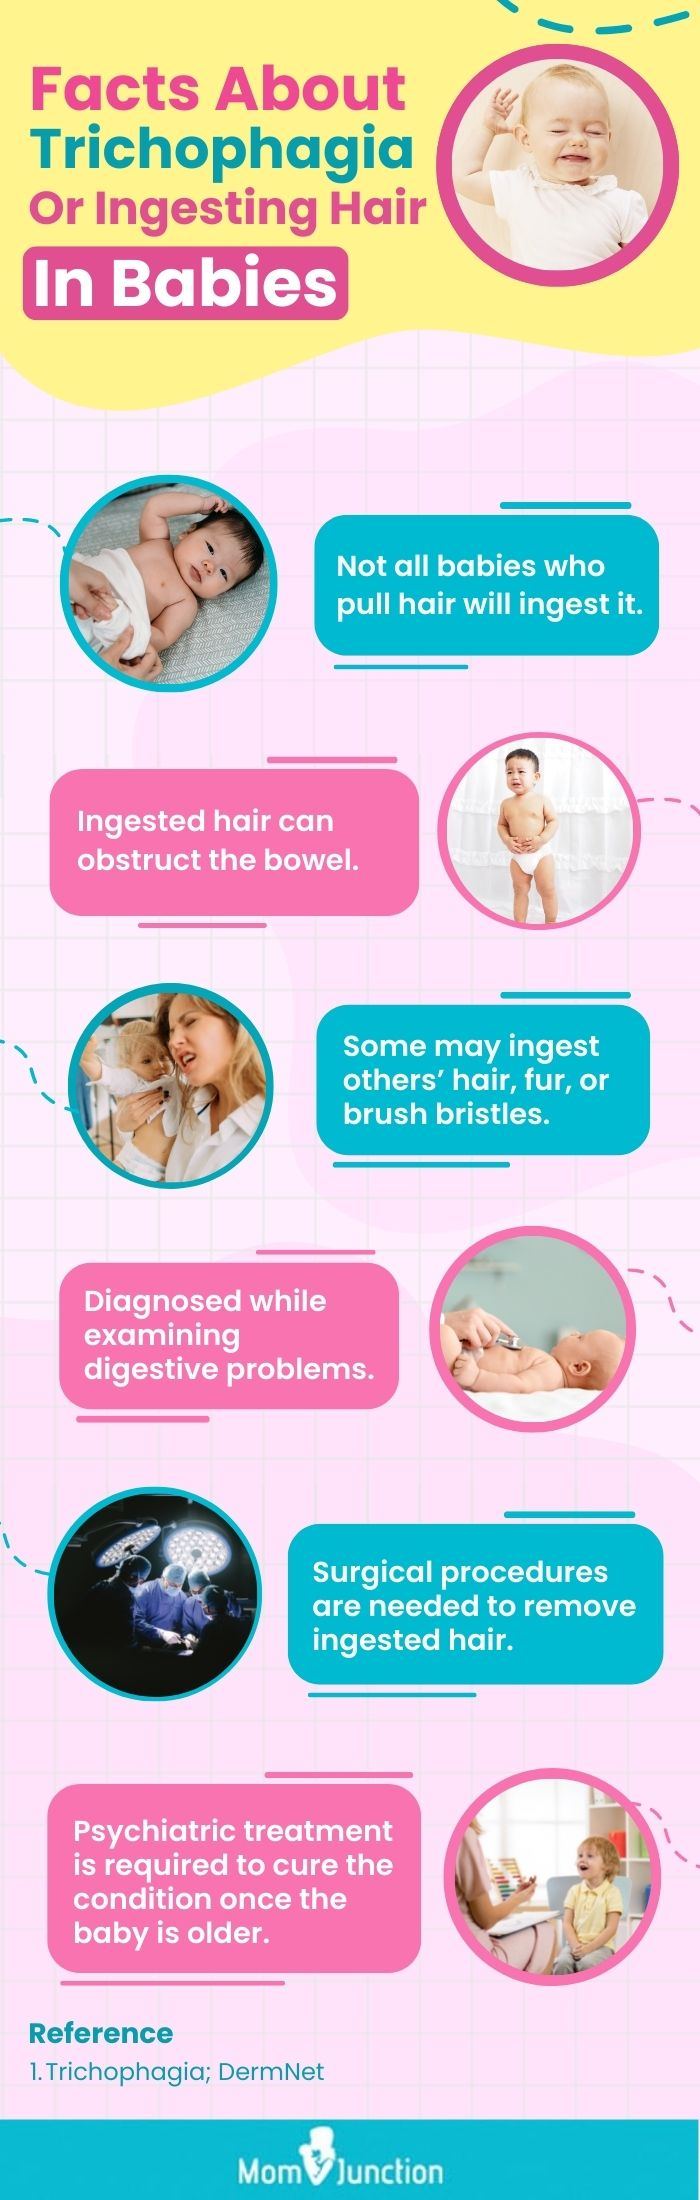 facts about trichophagia or ingesting hair in babies [infographic]